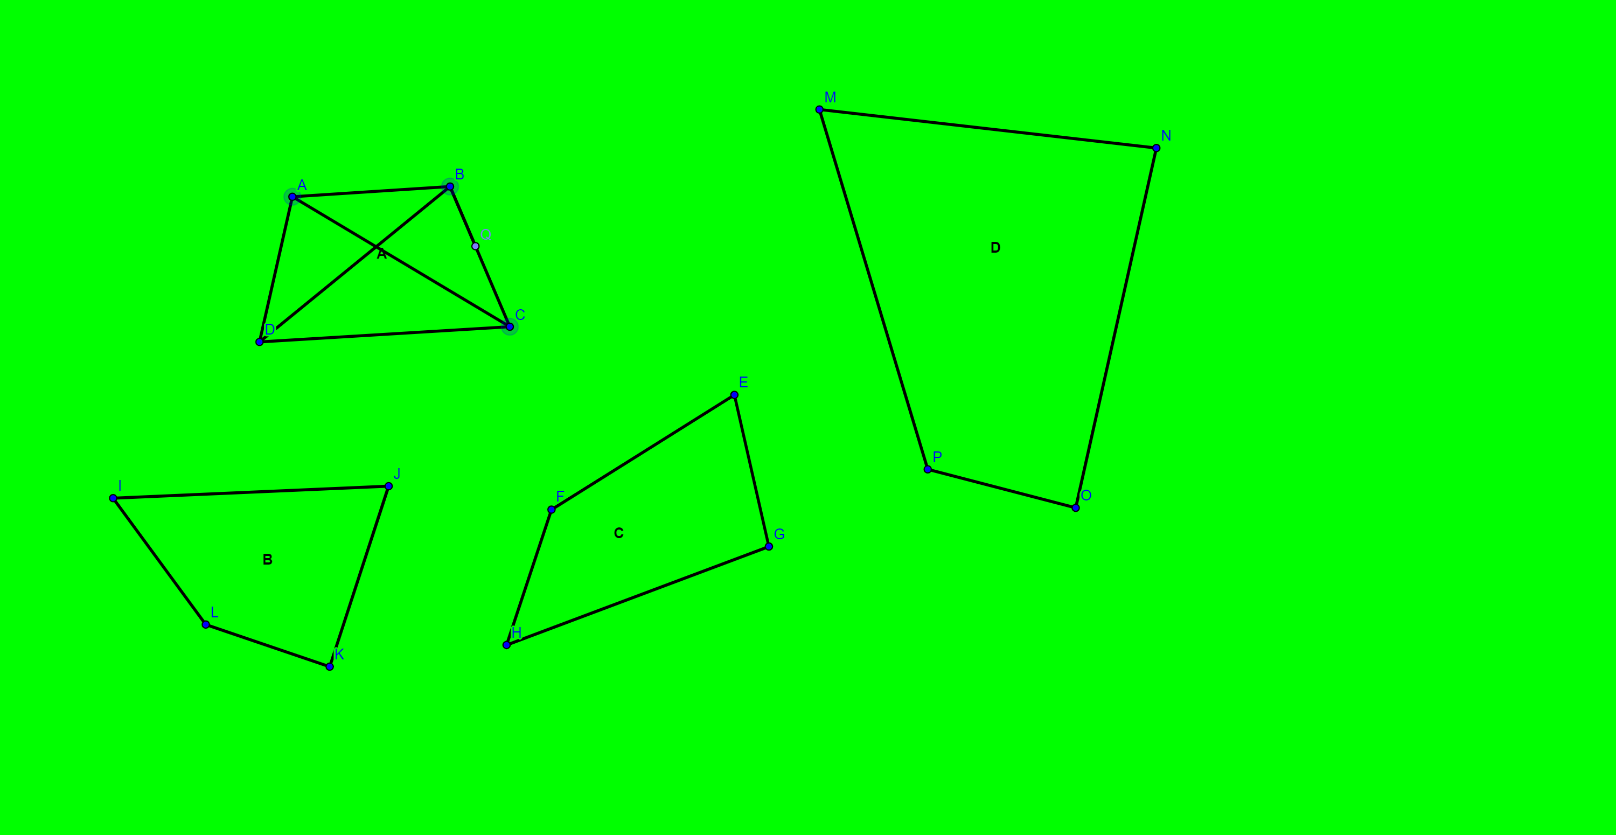 5. Label all parts of the trapezoids.